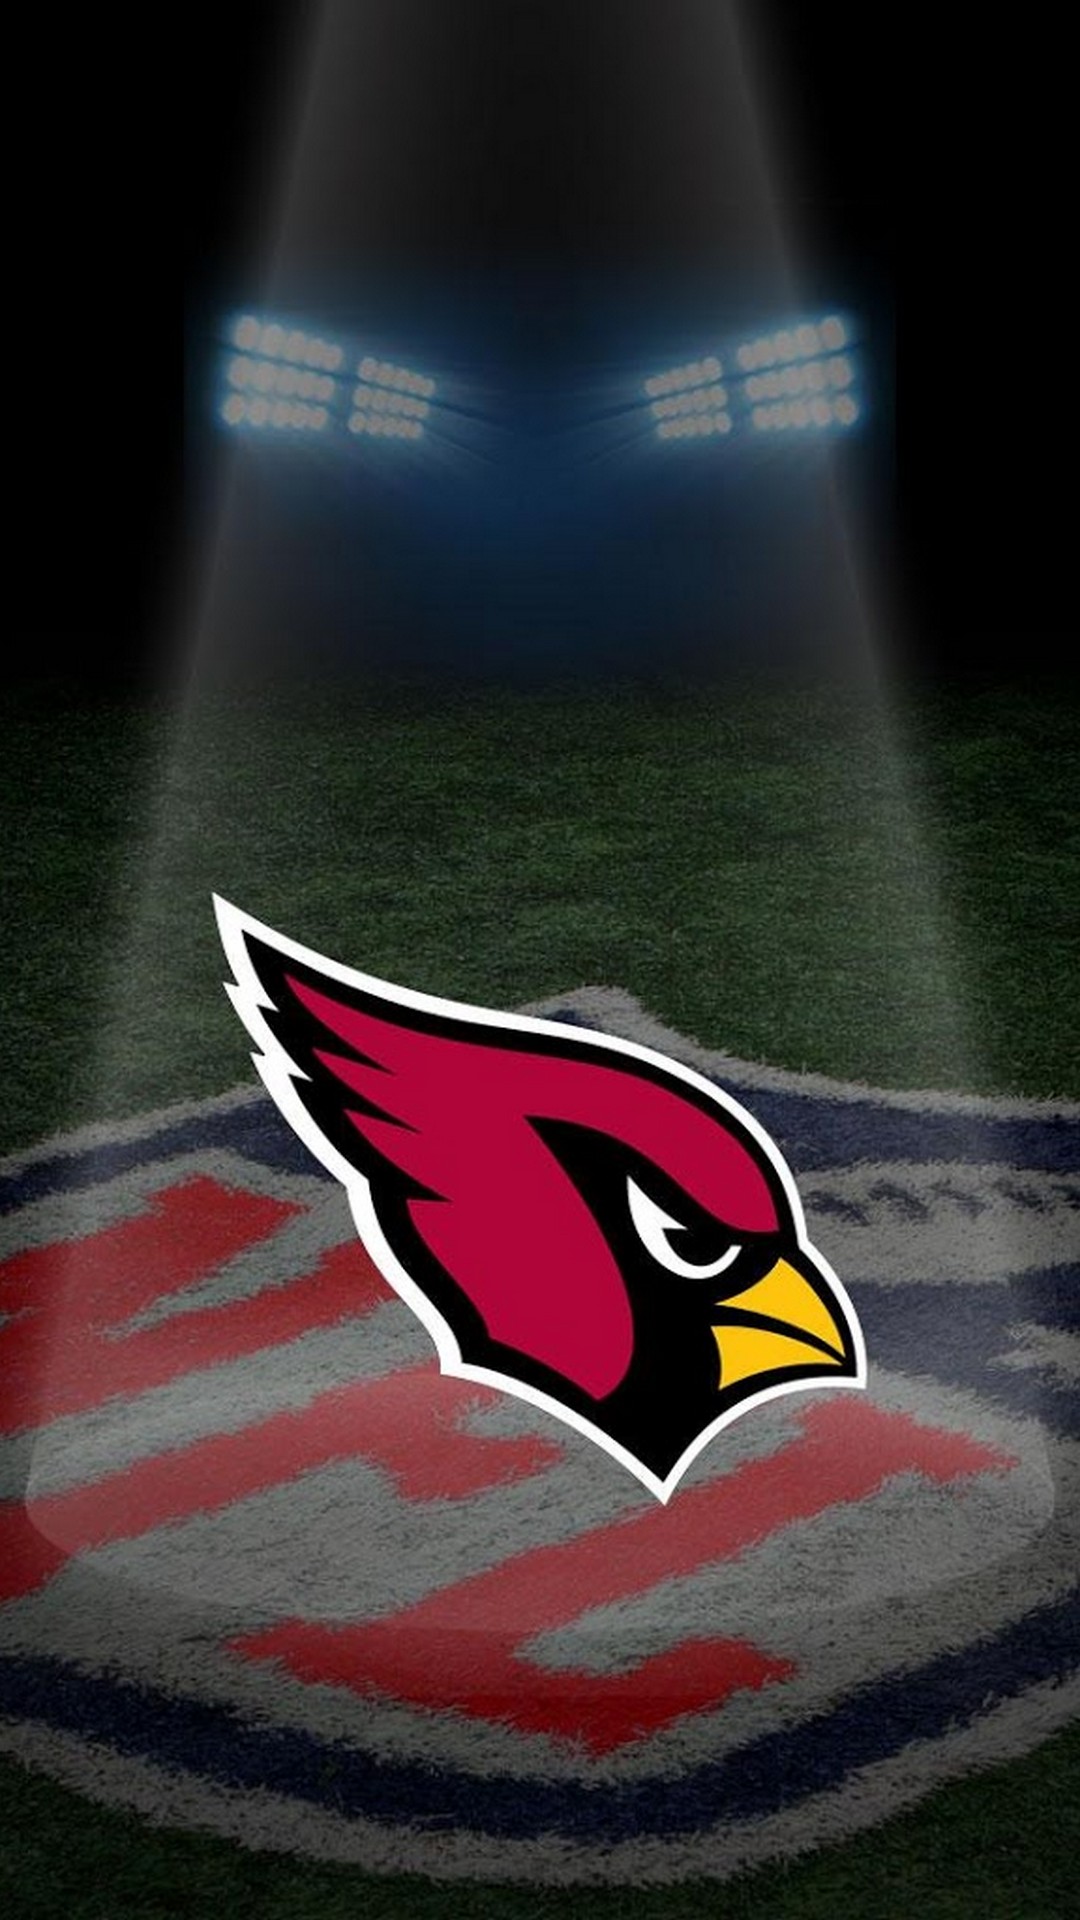 Arizona Cardinals iPhone 6 Plus Wallpaper With high-resolution 1080X1920 pixel. Download and set as wallpaper for Apple iPhone X, XS Max, XR, 8, 7, 6, SE, iPad, Android